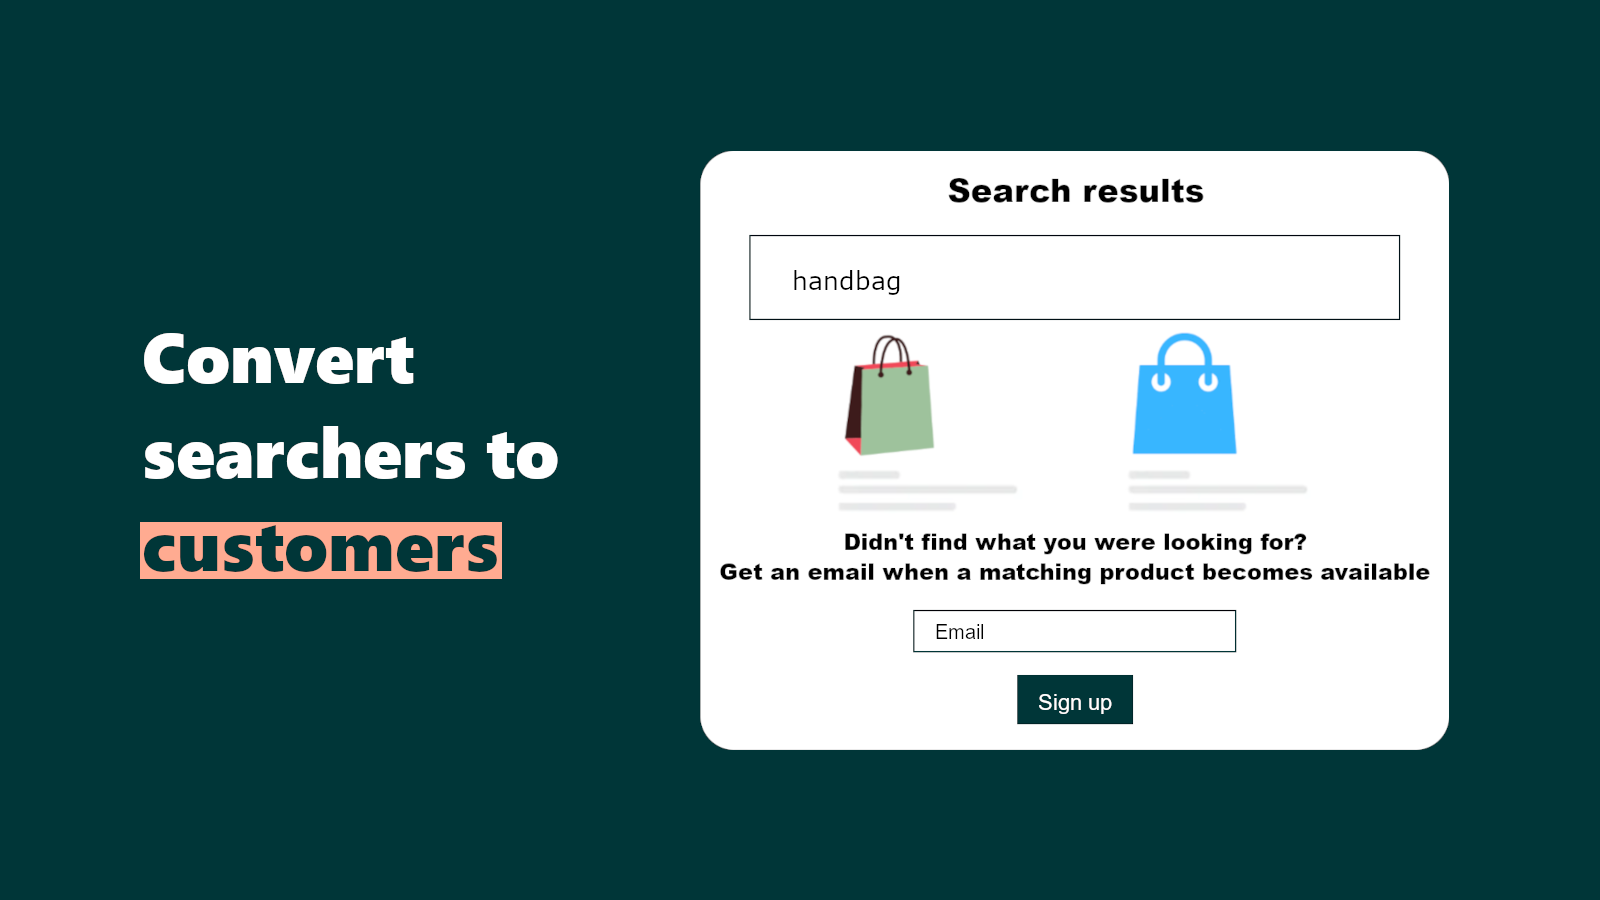 Convert searchers to customers